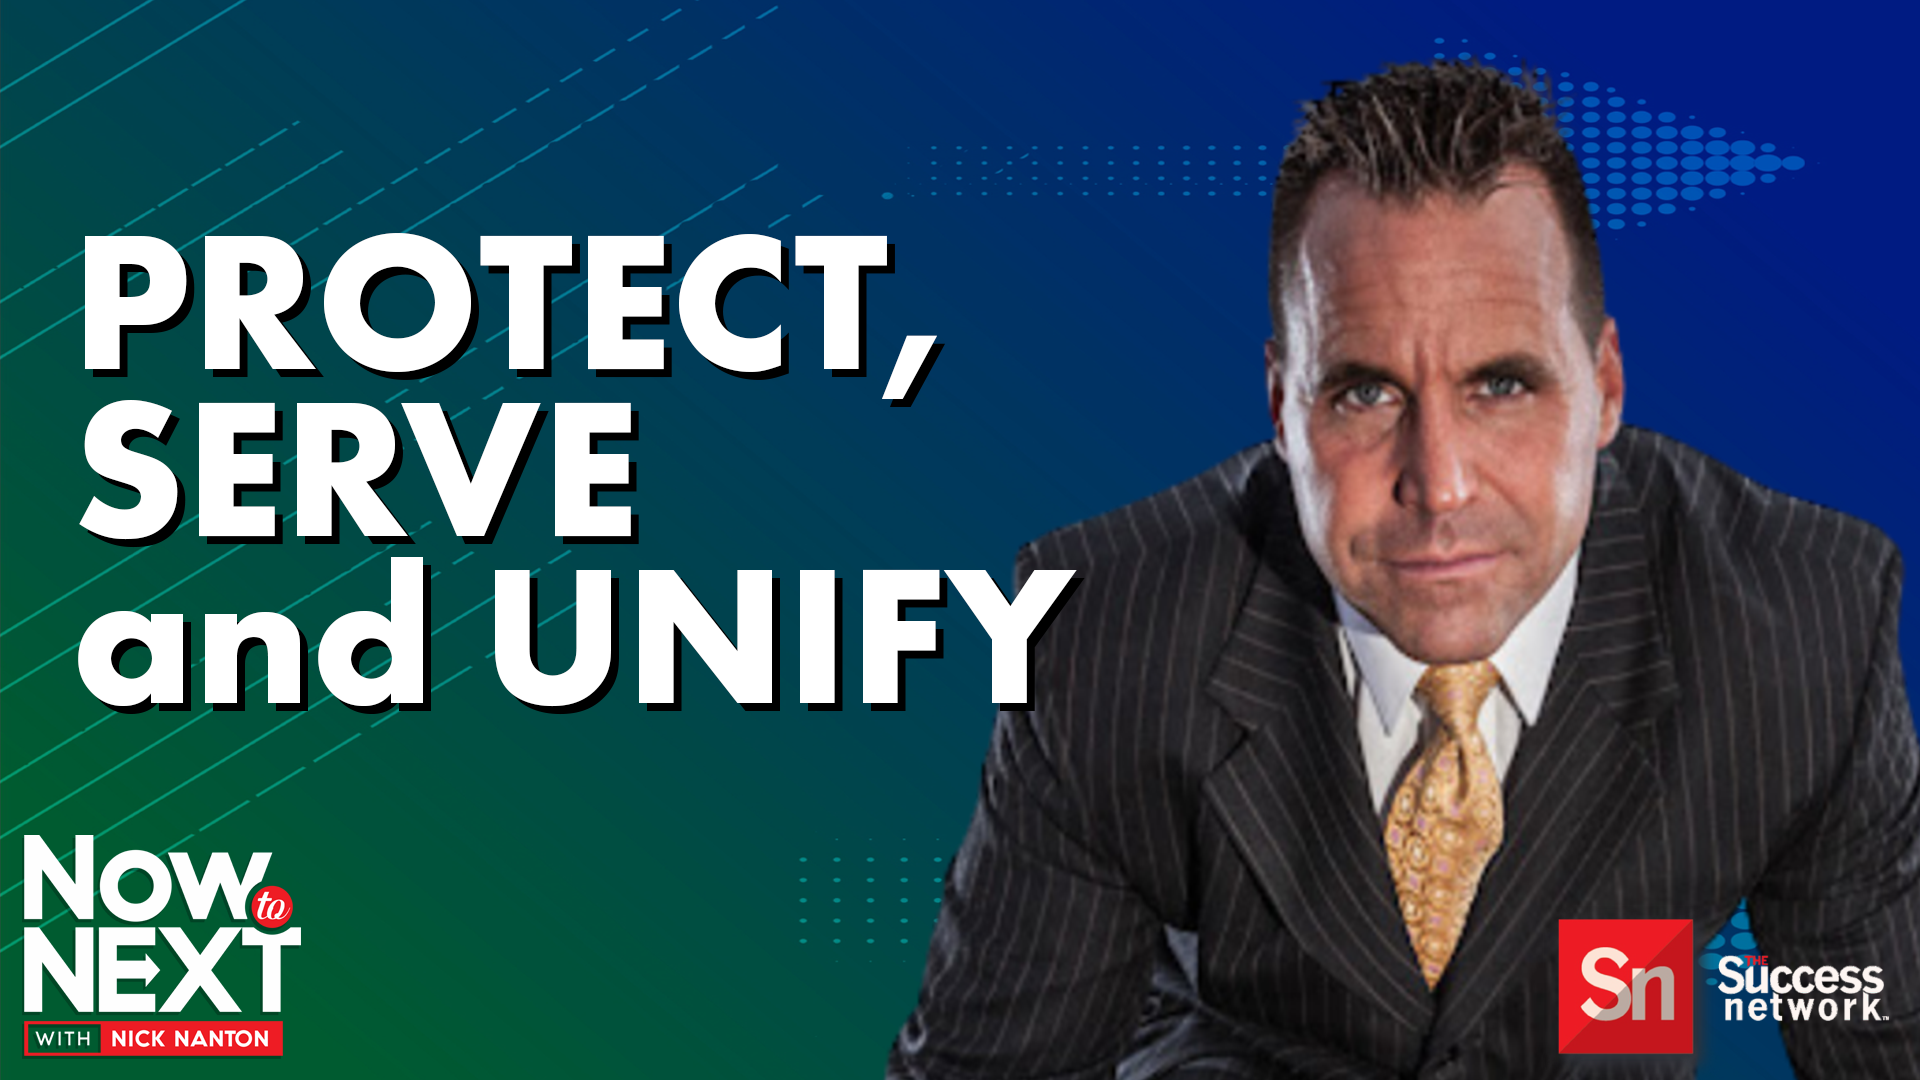 On A Mission To Protect, Educate, And Unify